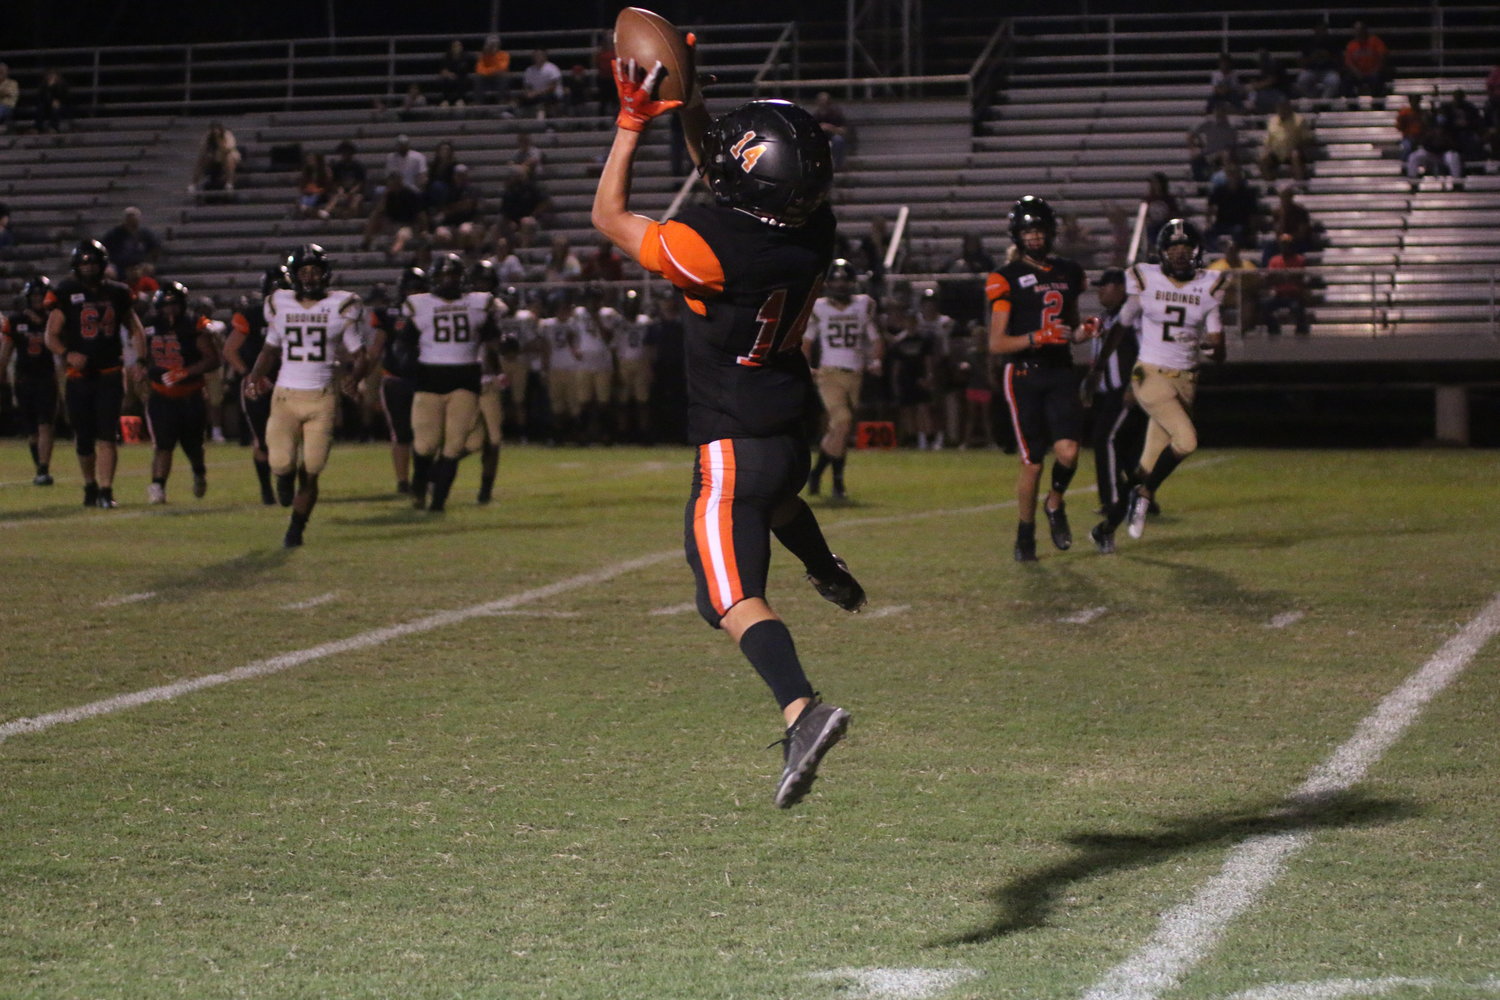 Braden Barfield jumps high to pull down one of his four catches. Barfield also intercepted his sixth pass of the season.